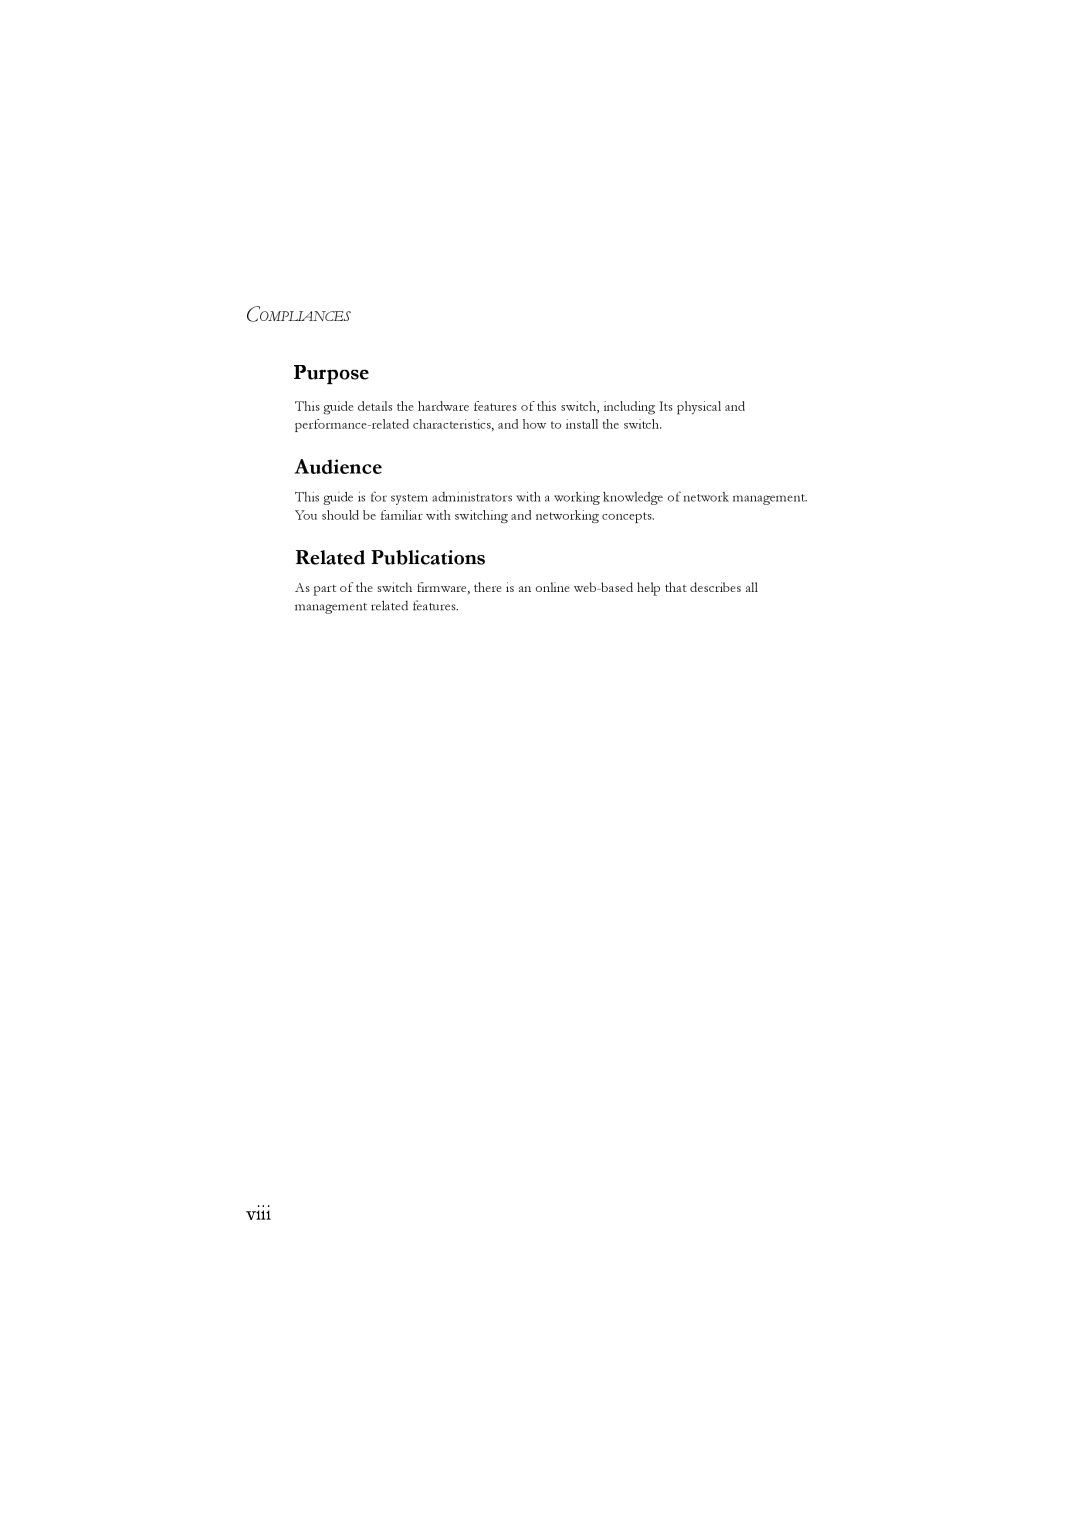 LevelOne GSW-2476 user manual viii, Purpose, Audience, Related Publications, Compliances 